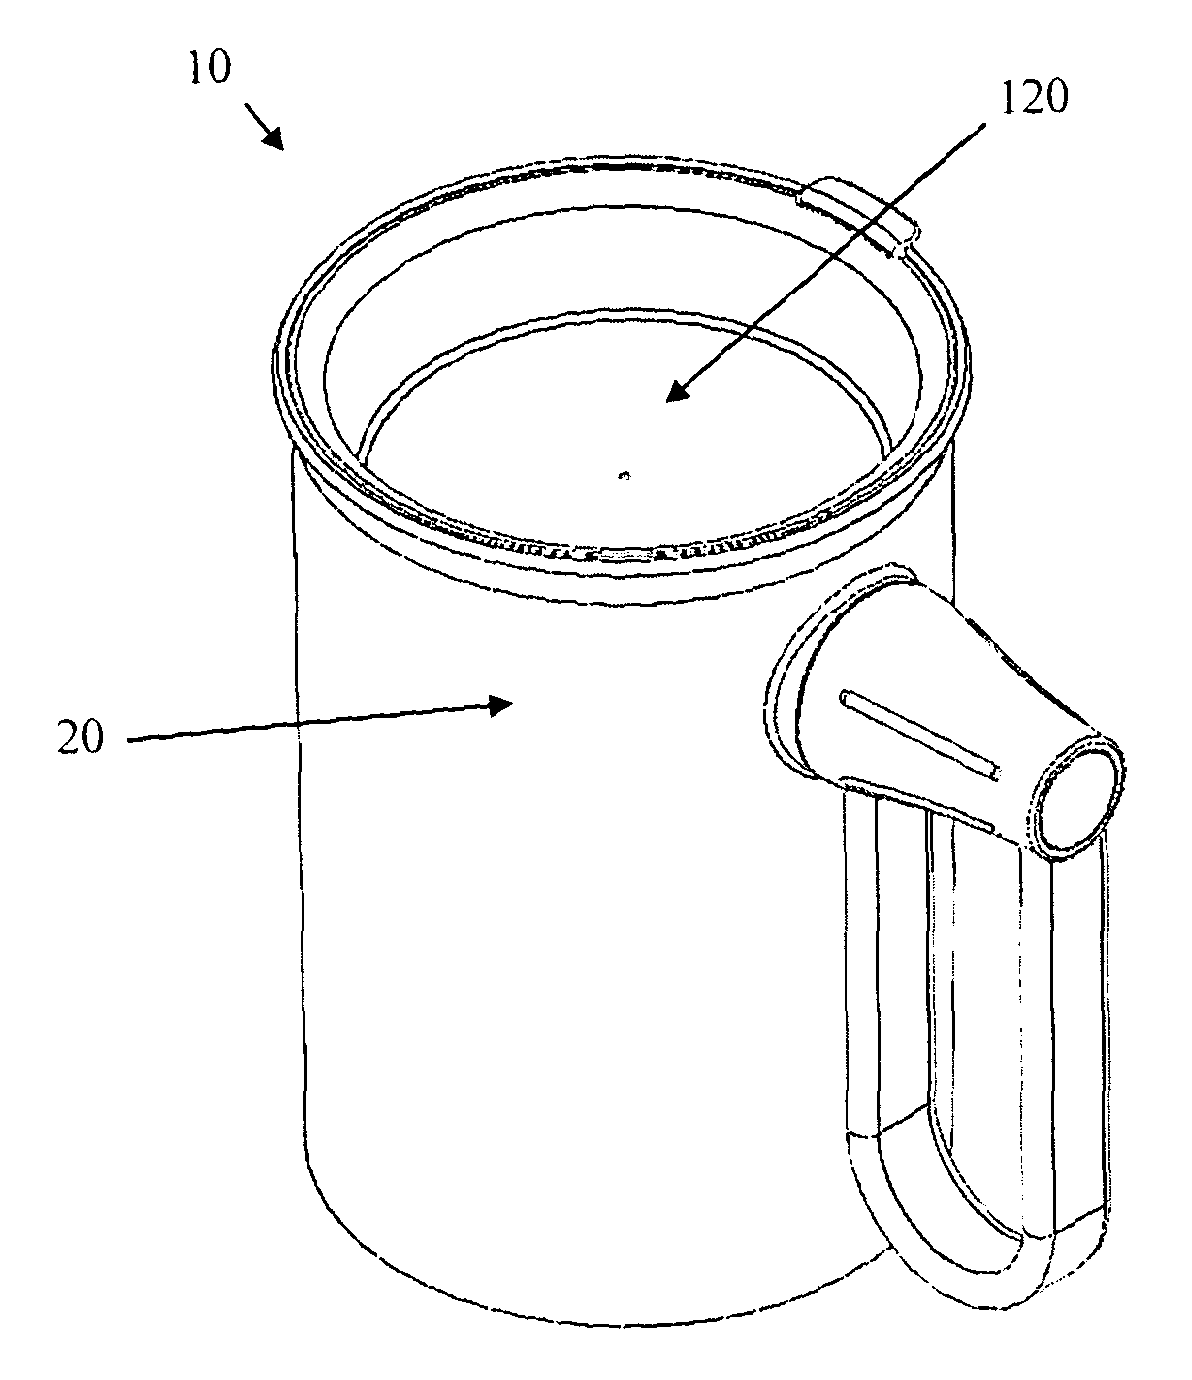 Liquid-dispensing container with single gimbal mechanism